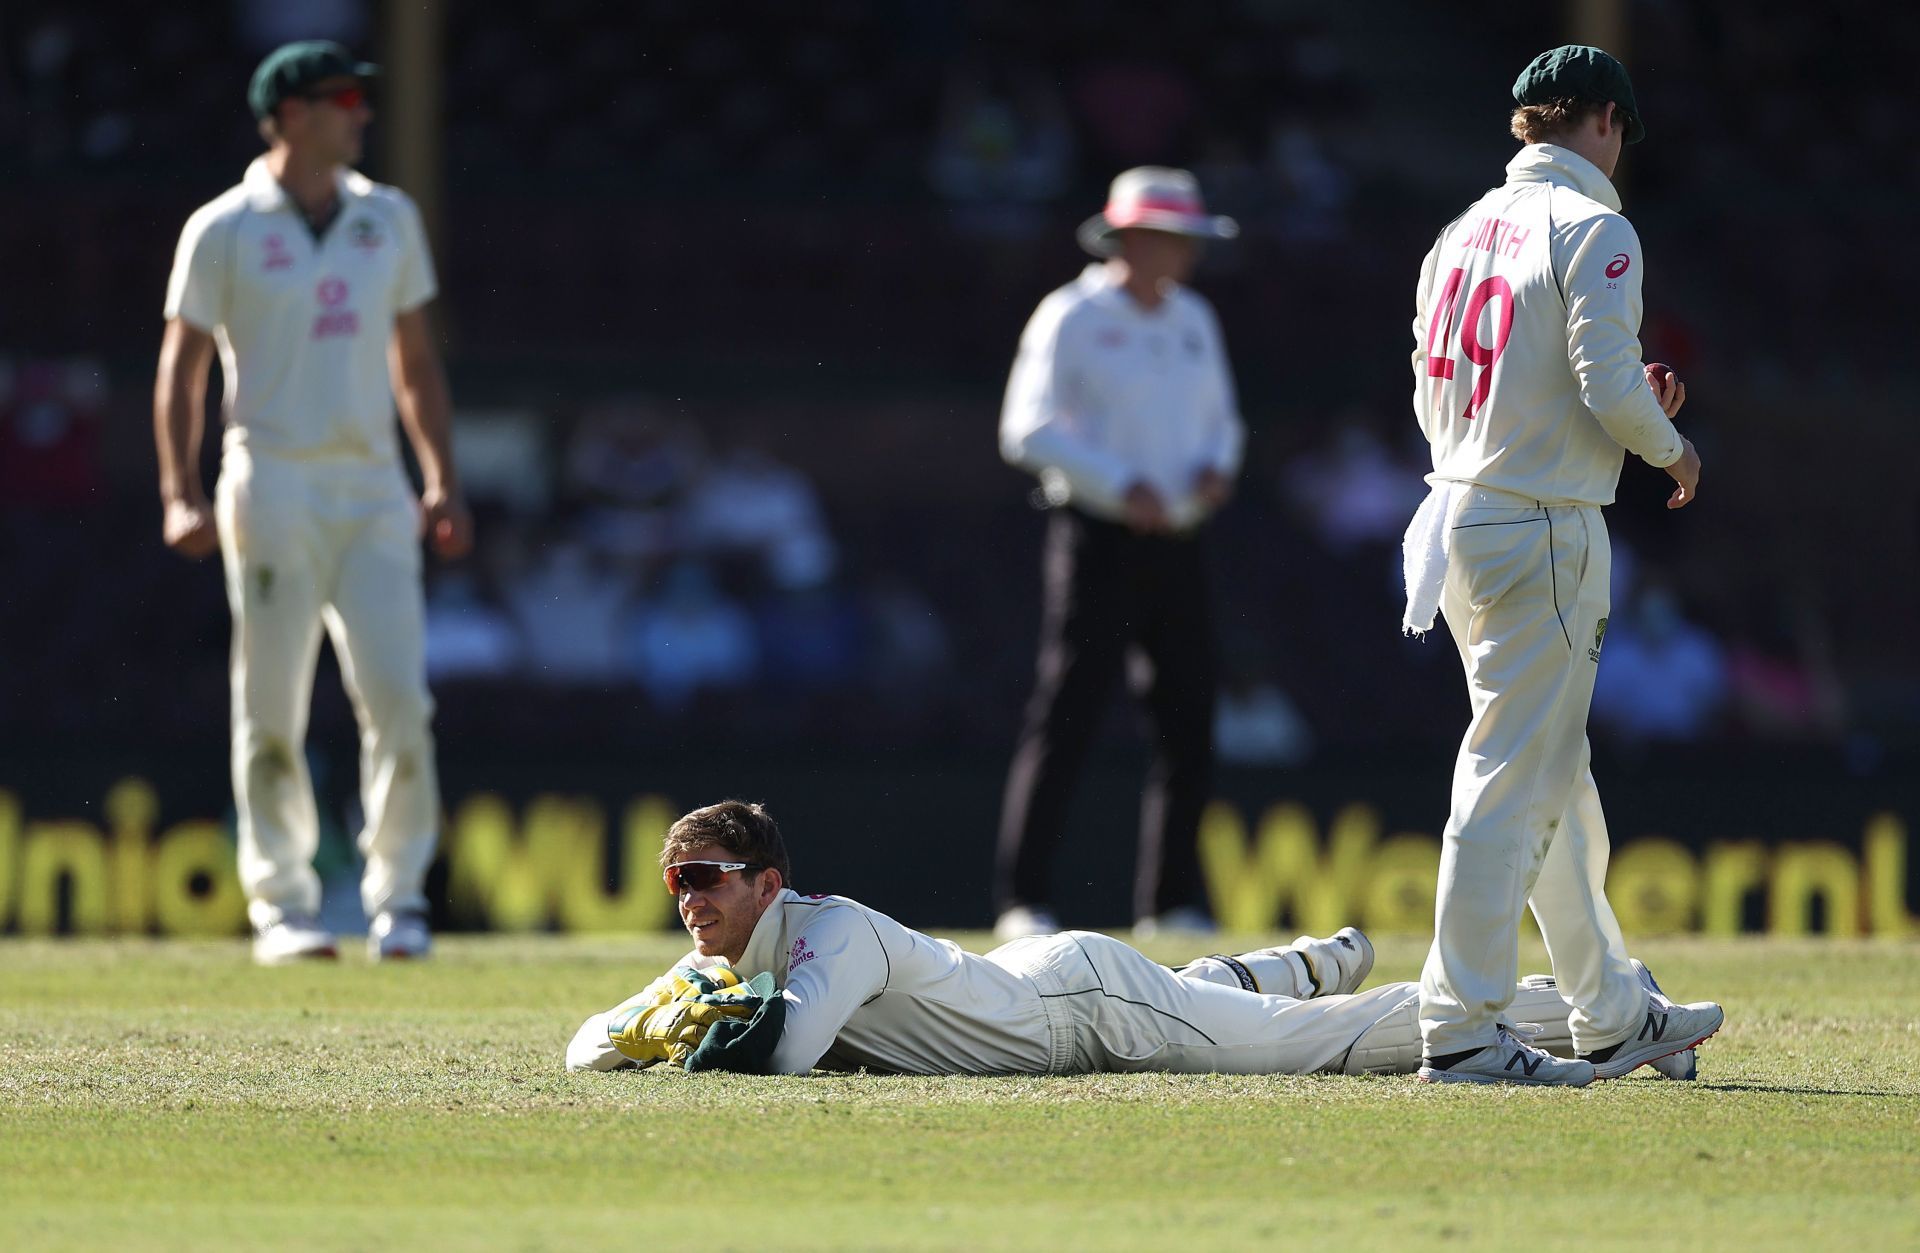 Tim Paine reacts after a dropped catch. Pic: Getty Images